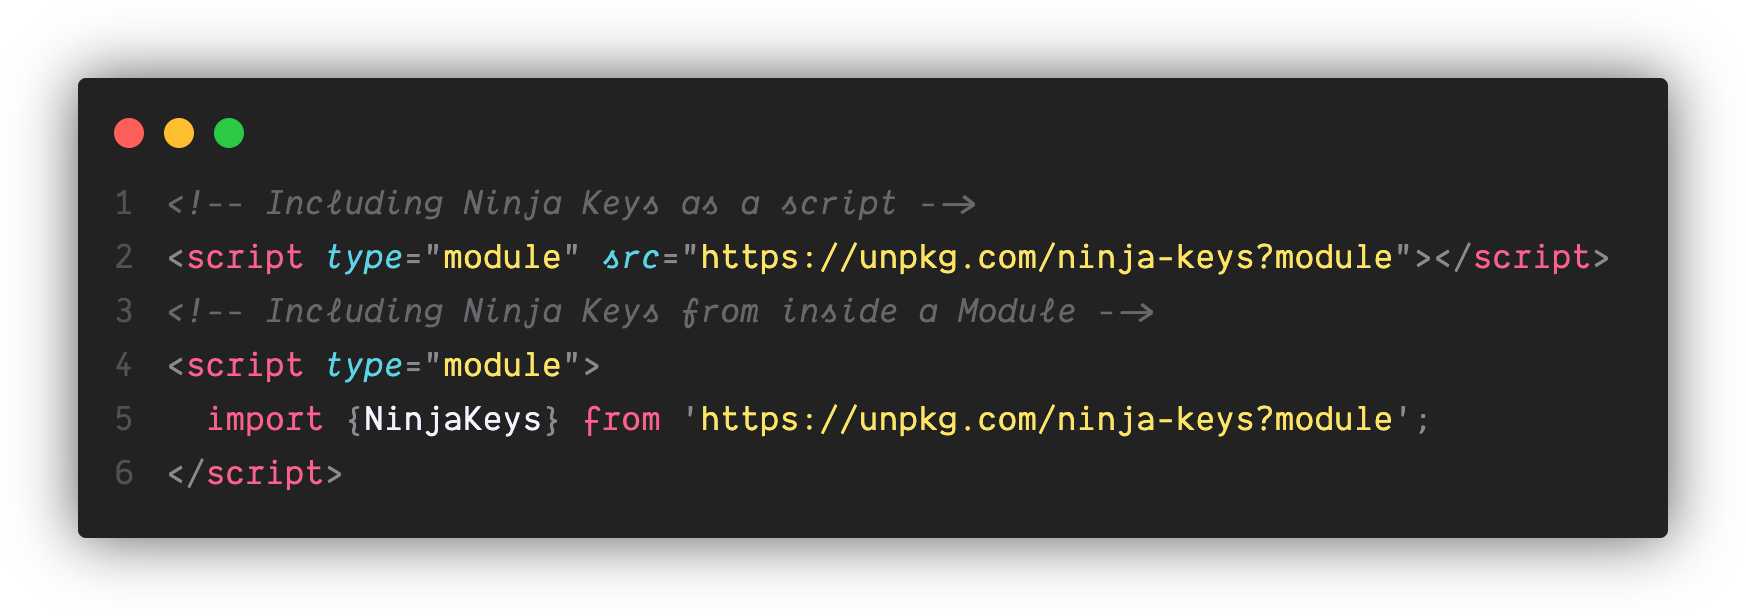 Two script module tags. The first one with a source pointing to the ninja keys CDN, and the second is using code to import NinjaKeys from the same CDN